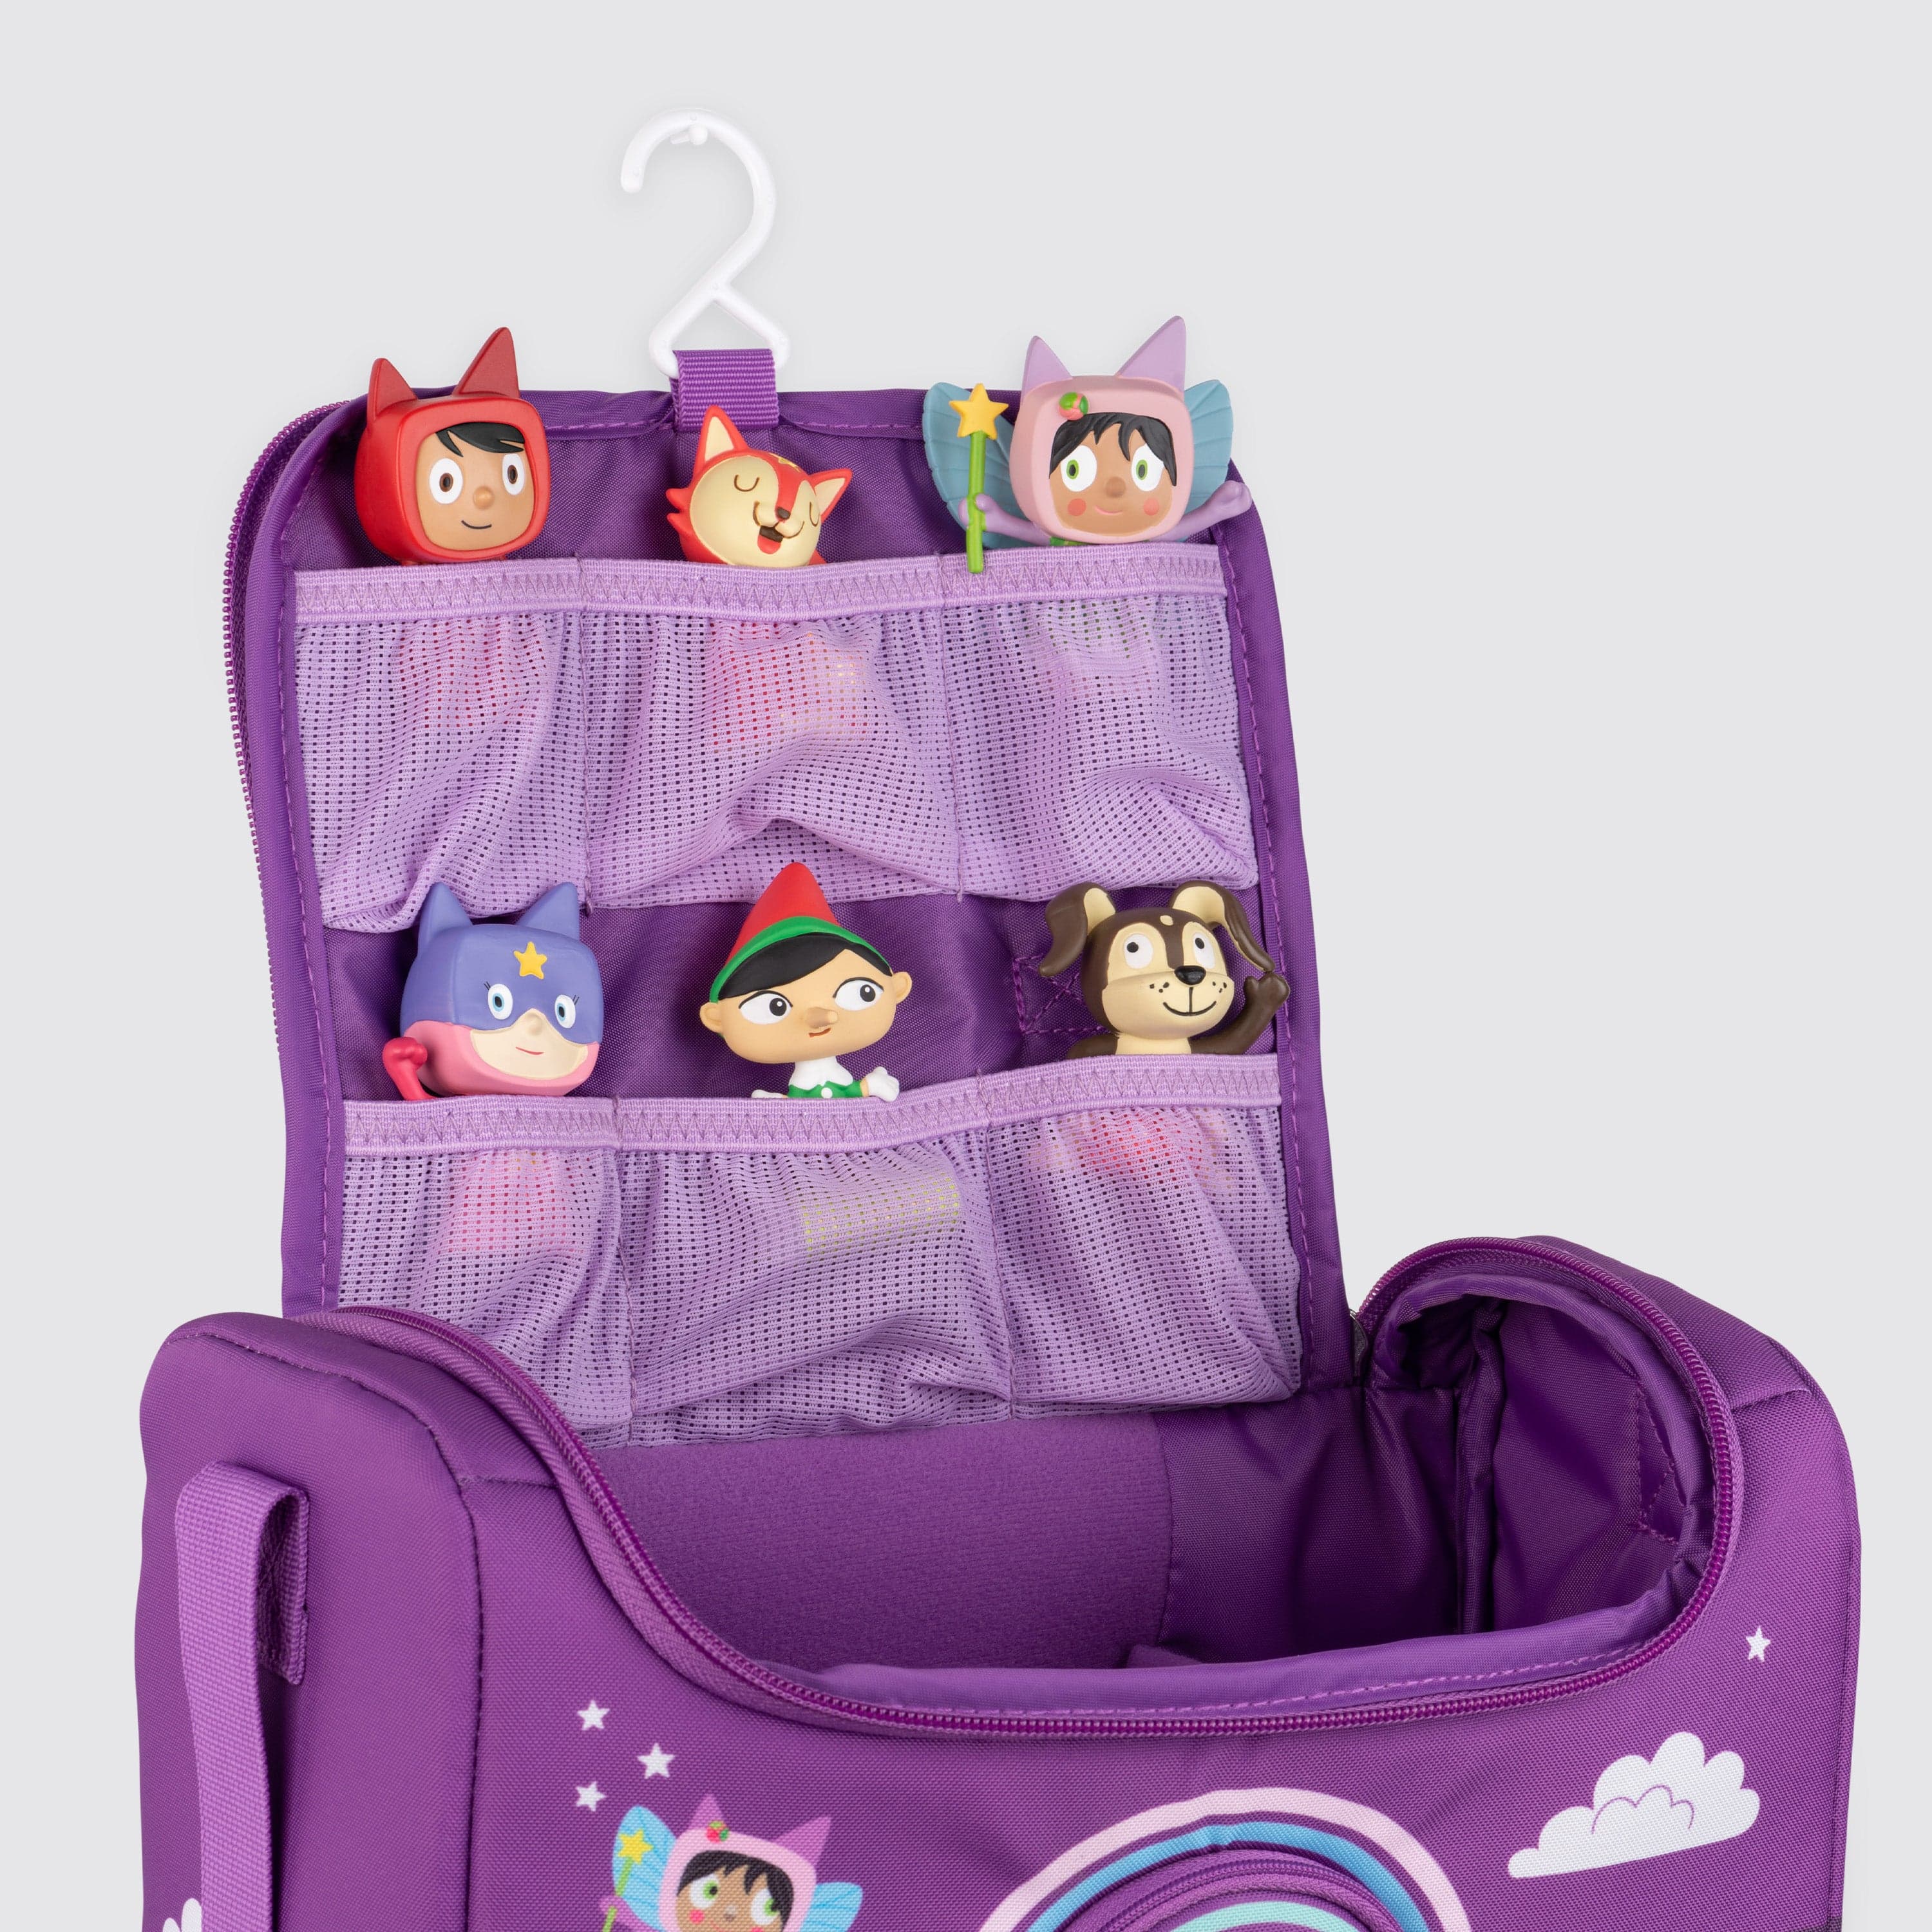 Tonies Listen & Play Bag - Secure Protection for your Toniebox, Headphones,  Charging Station, and 6 Characters - Over the Rainbow